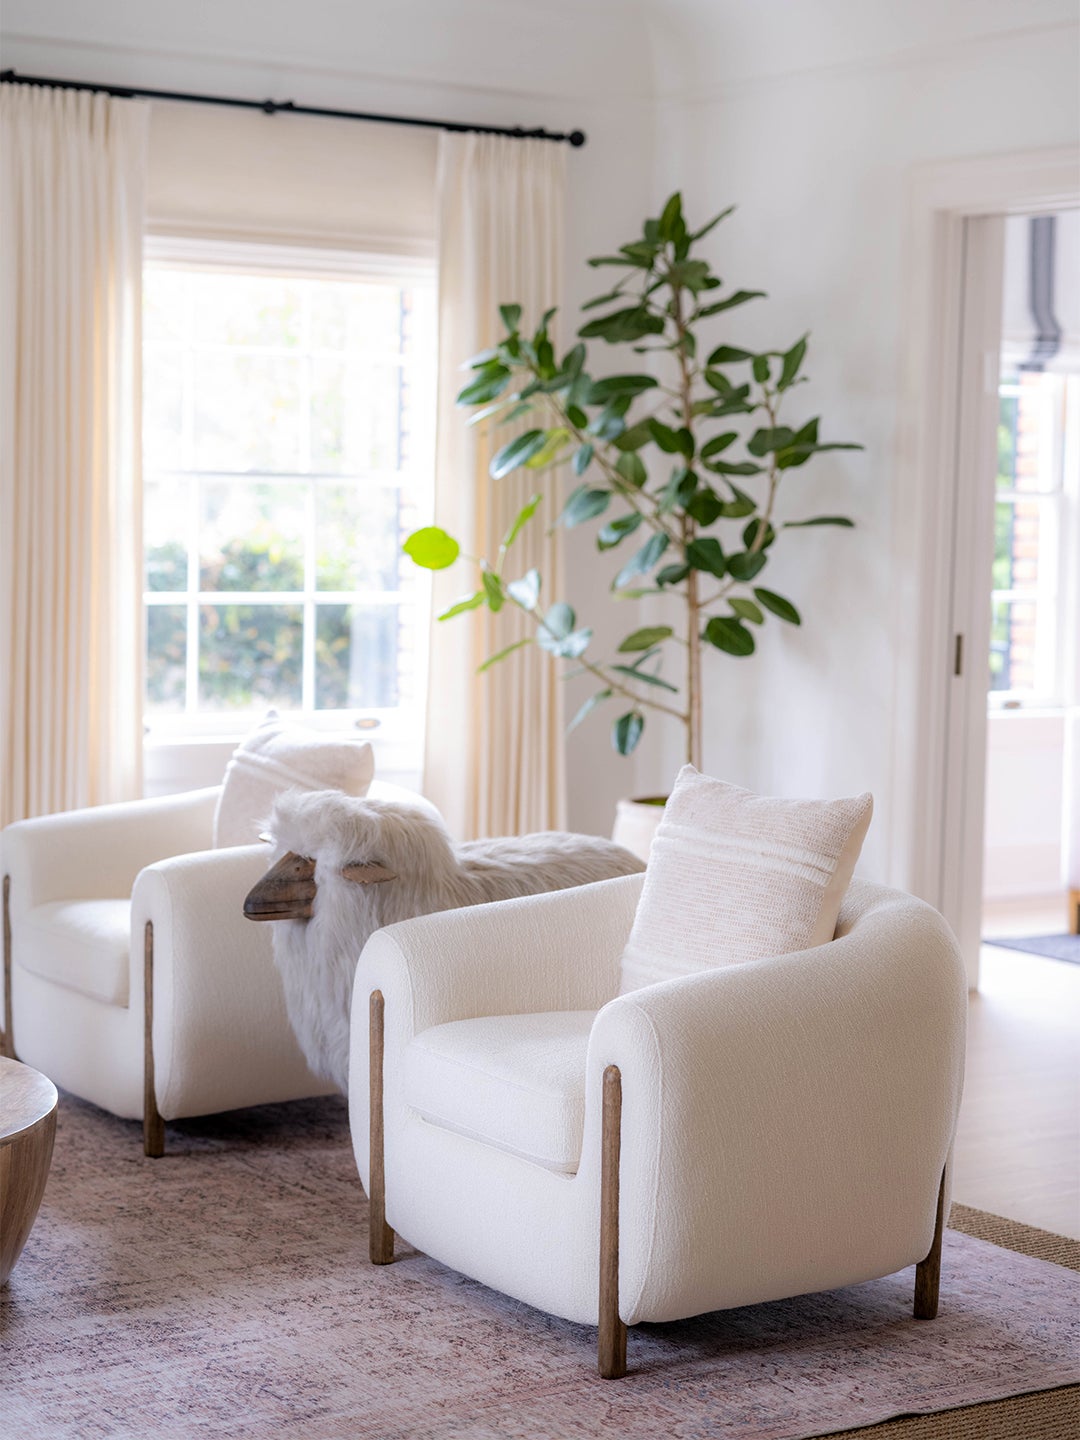 White chairs in a living room with sheep